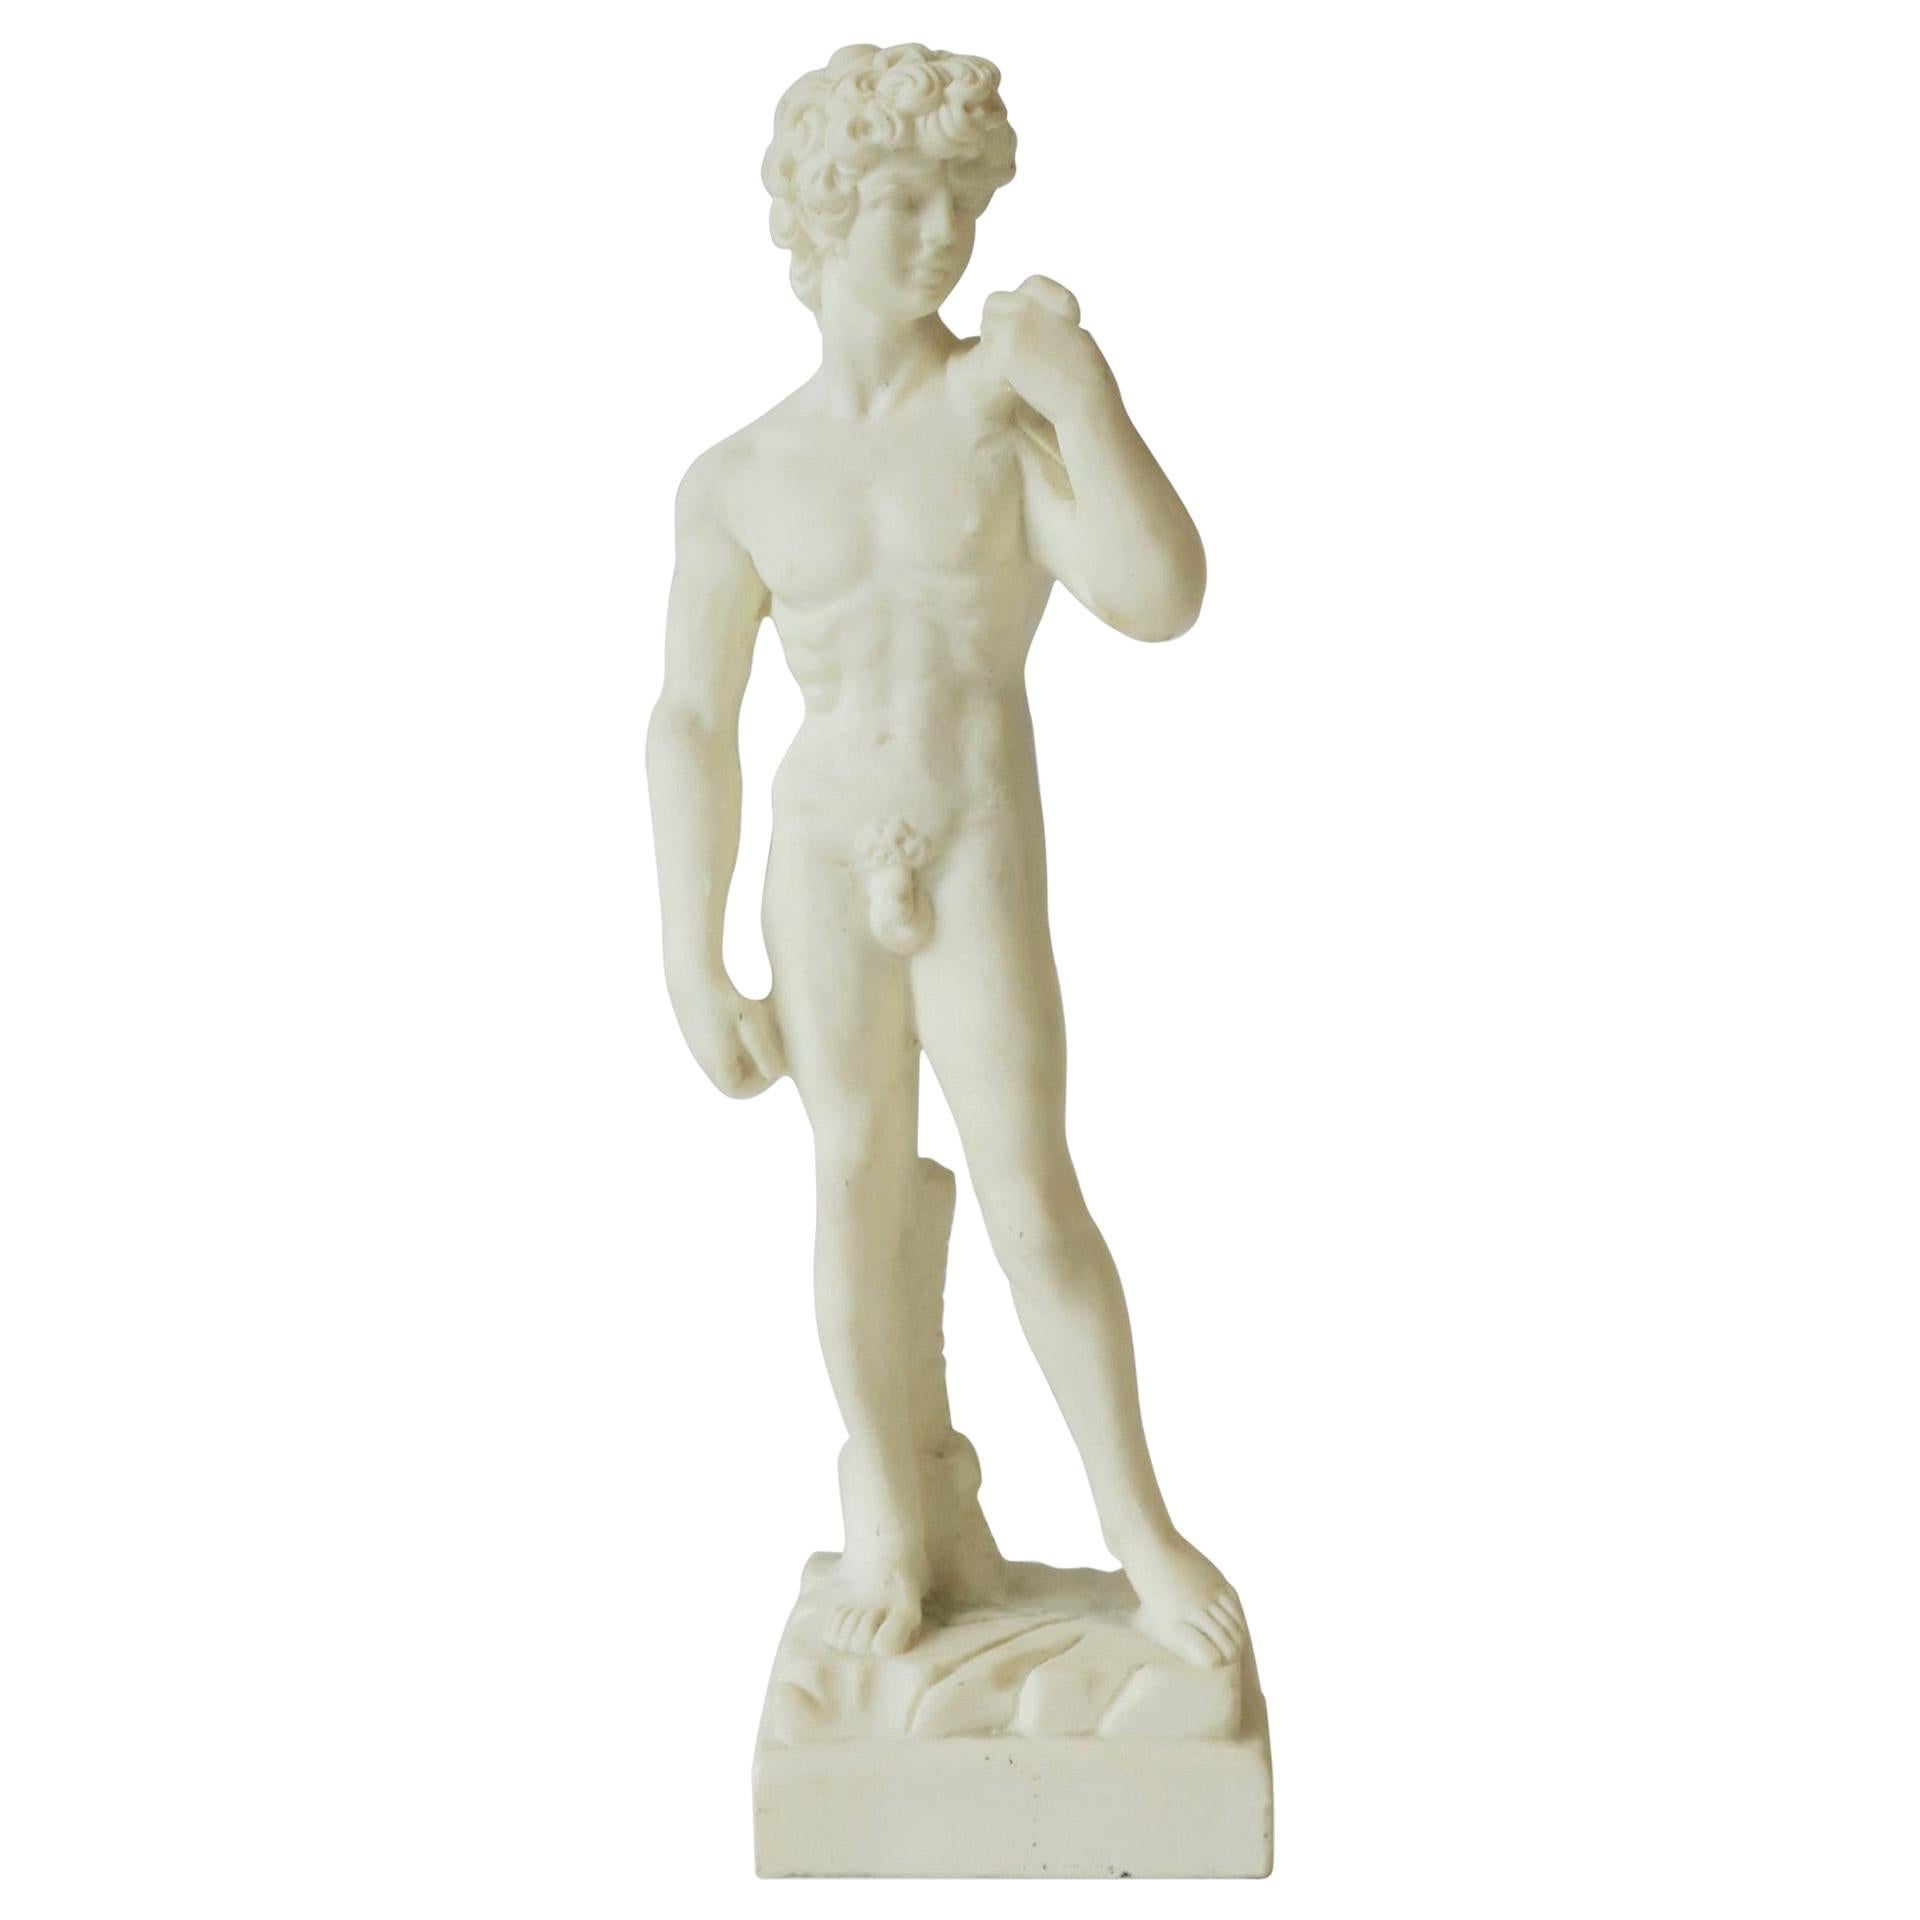 Classic Roman Sculptures - 4 For Sale on 1stDibs